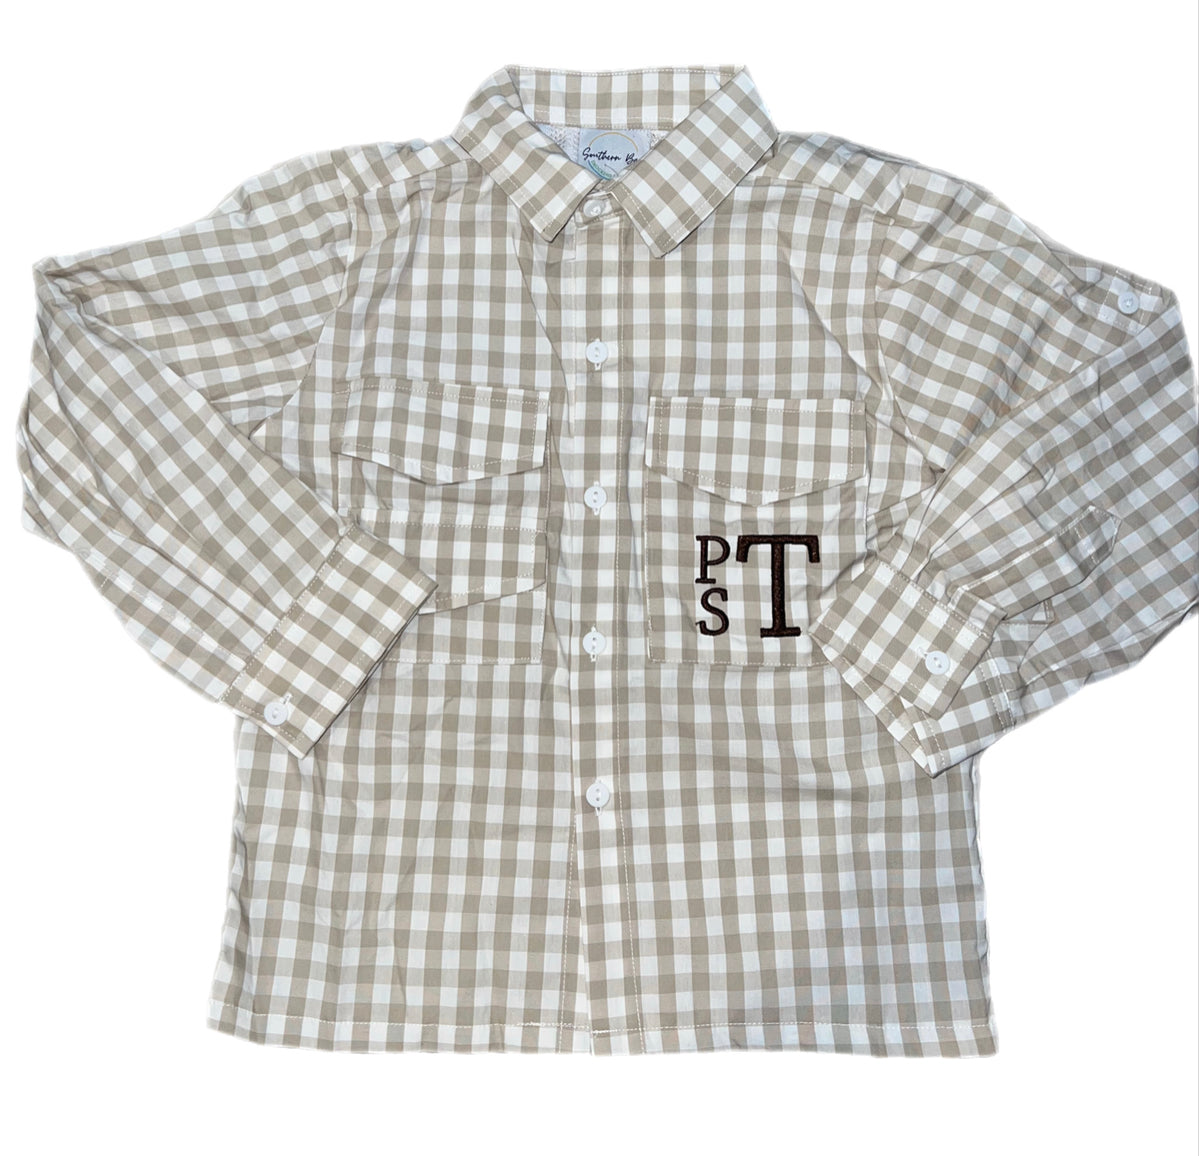 RTS: SBSC- Boys Only Collection- Duck Applique- Boys Woven Shirt “PTS”